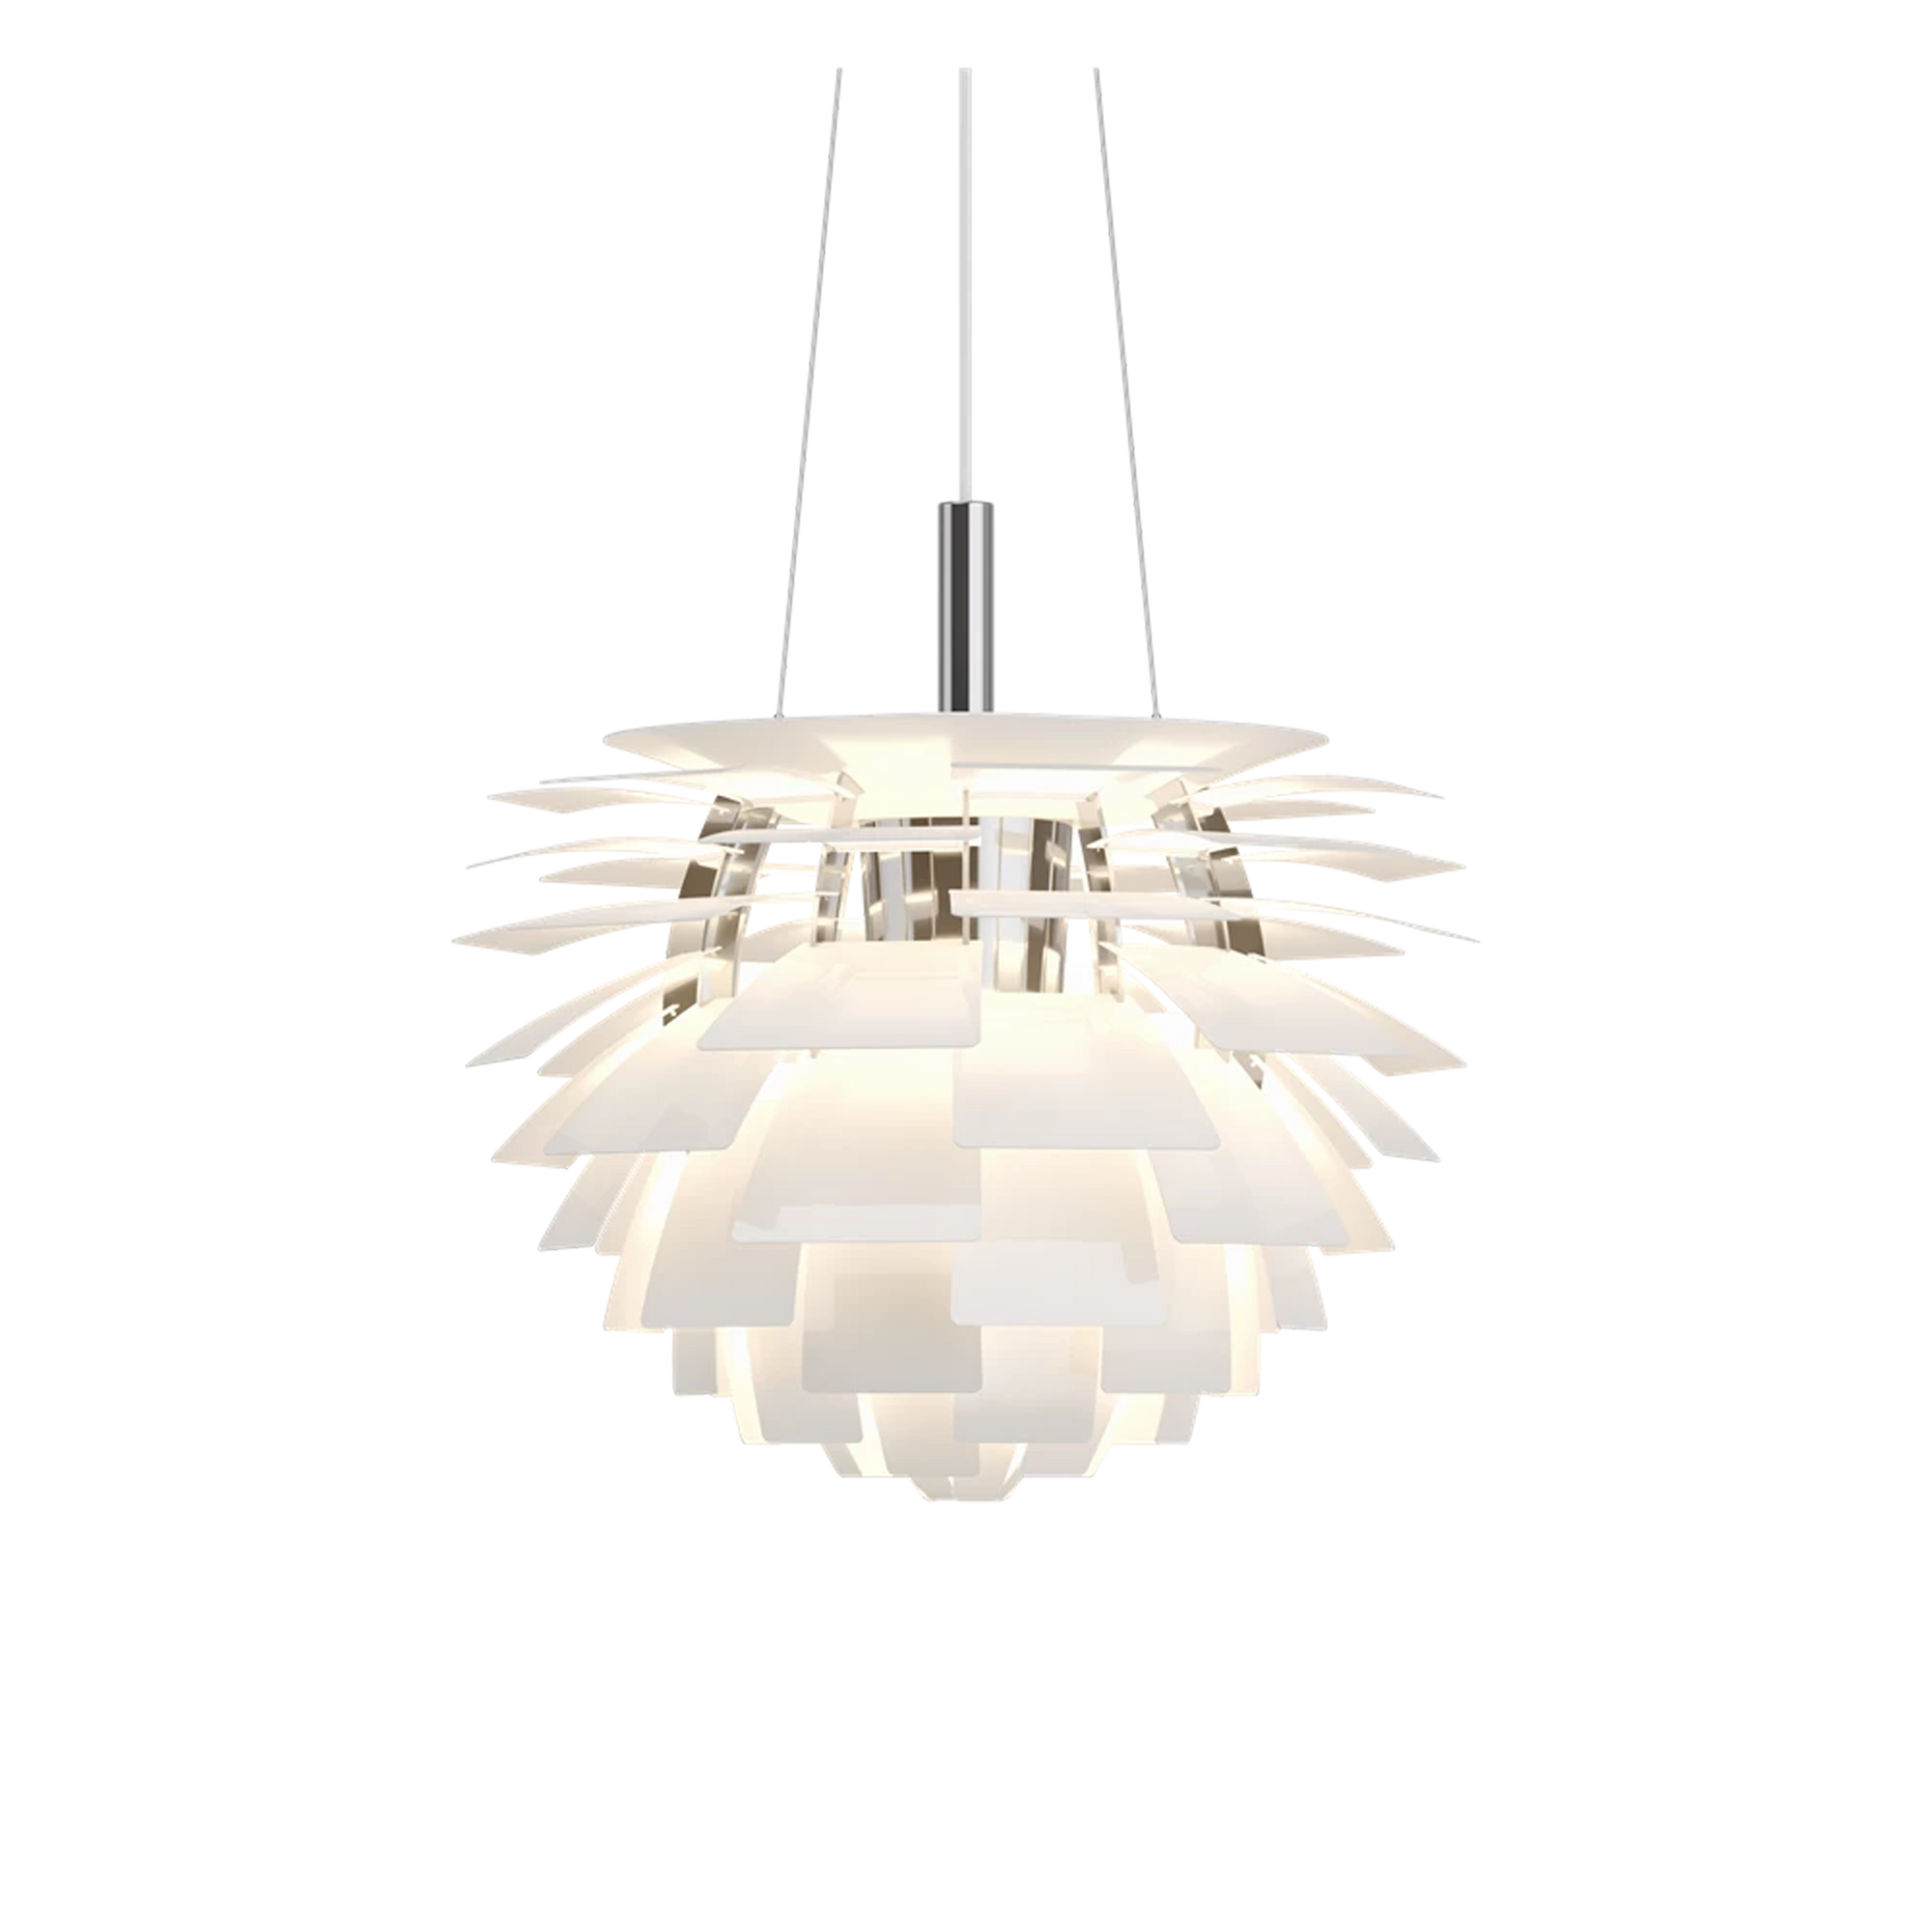 In 1958, Poul Henningsen designed the PH Artichoke Pendant Lamp for the Langelinie Pavilion, a modernist Copenhagen restaurant, in which the PH Artichoke continues to enchant guest